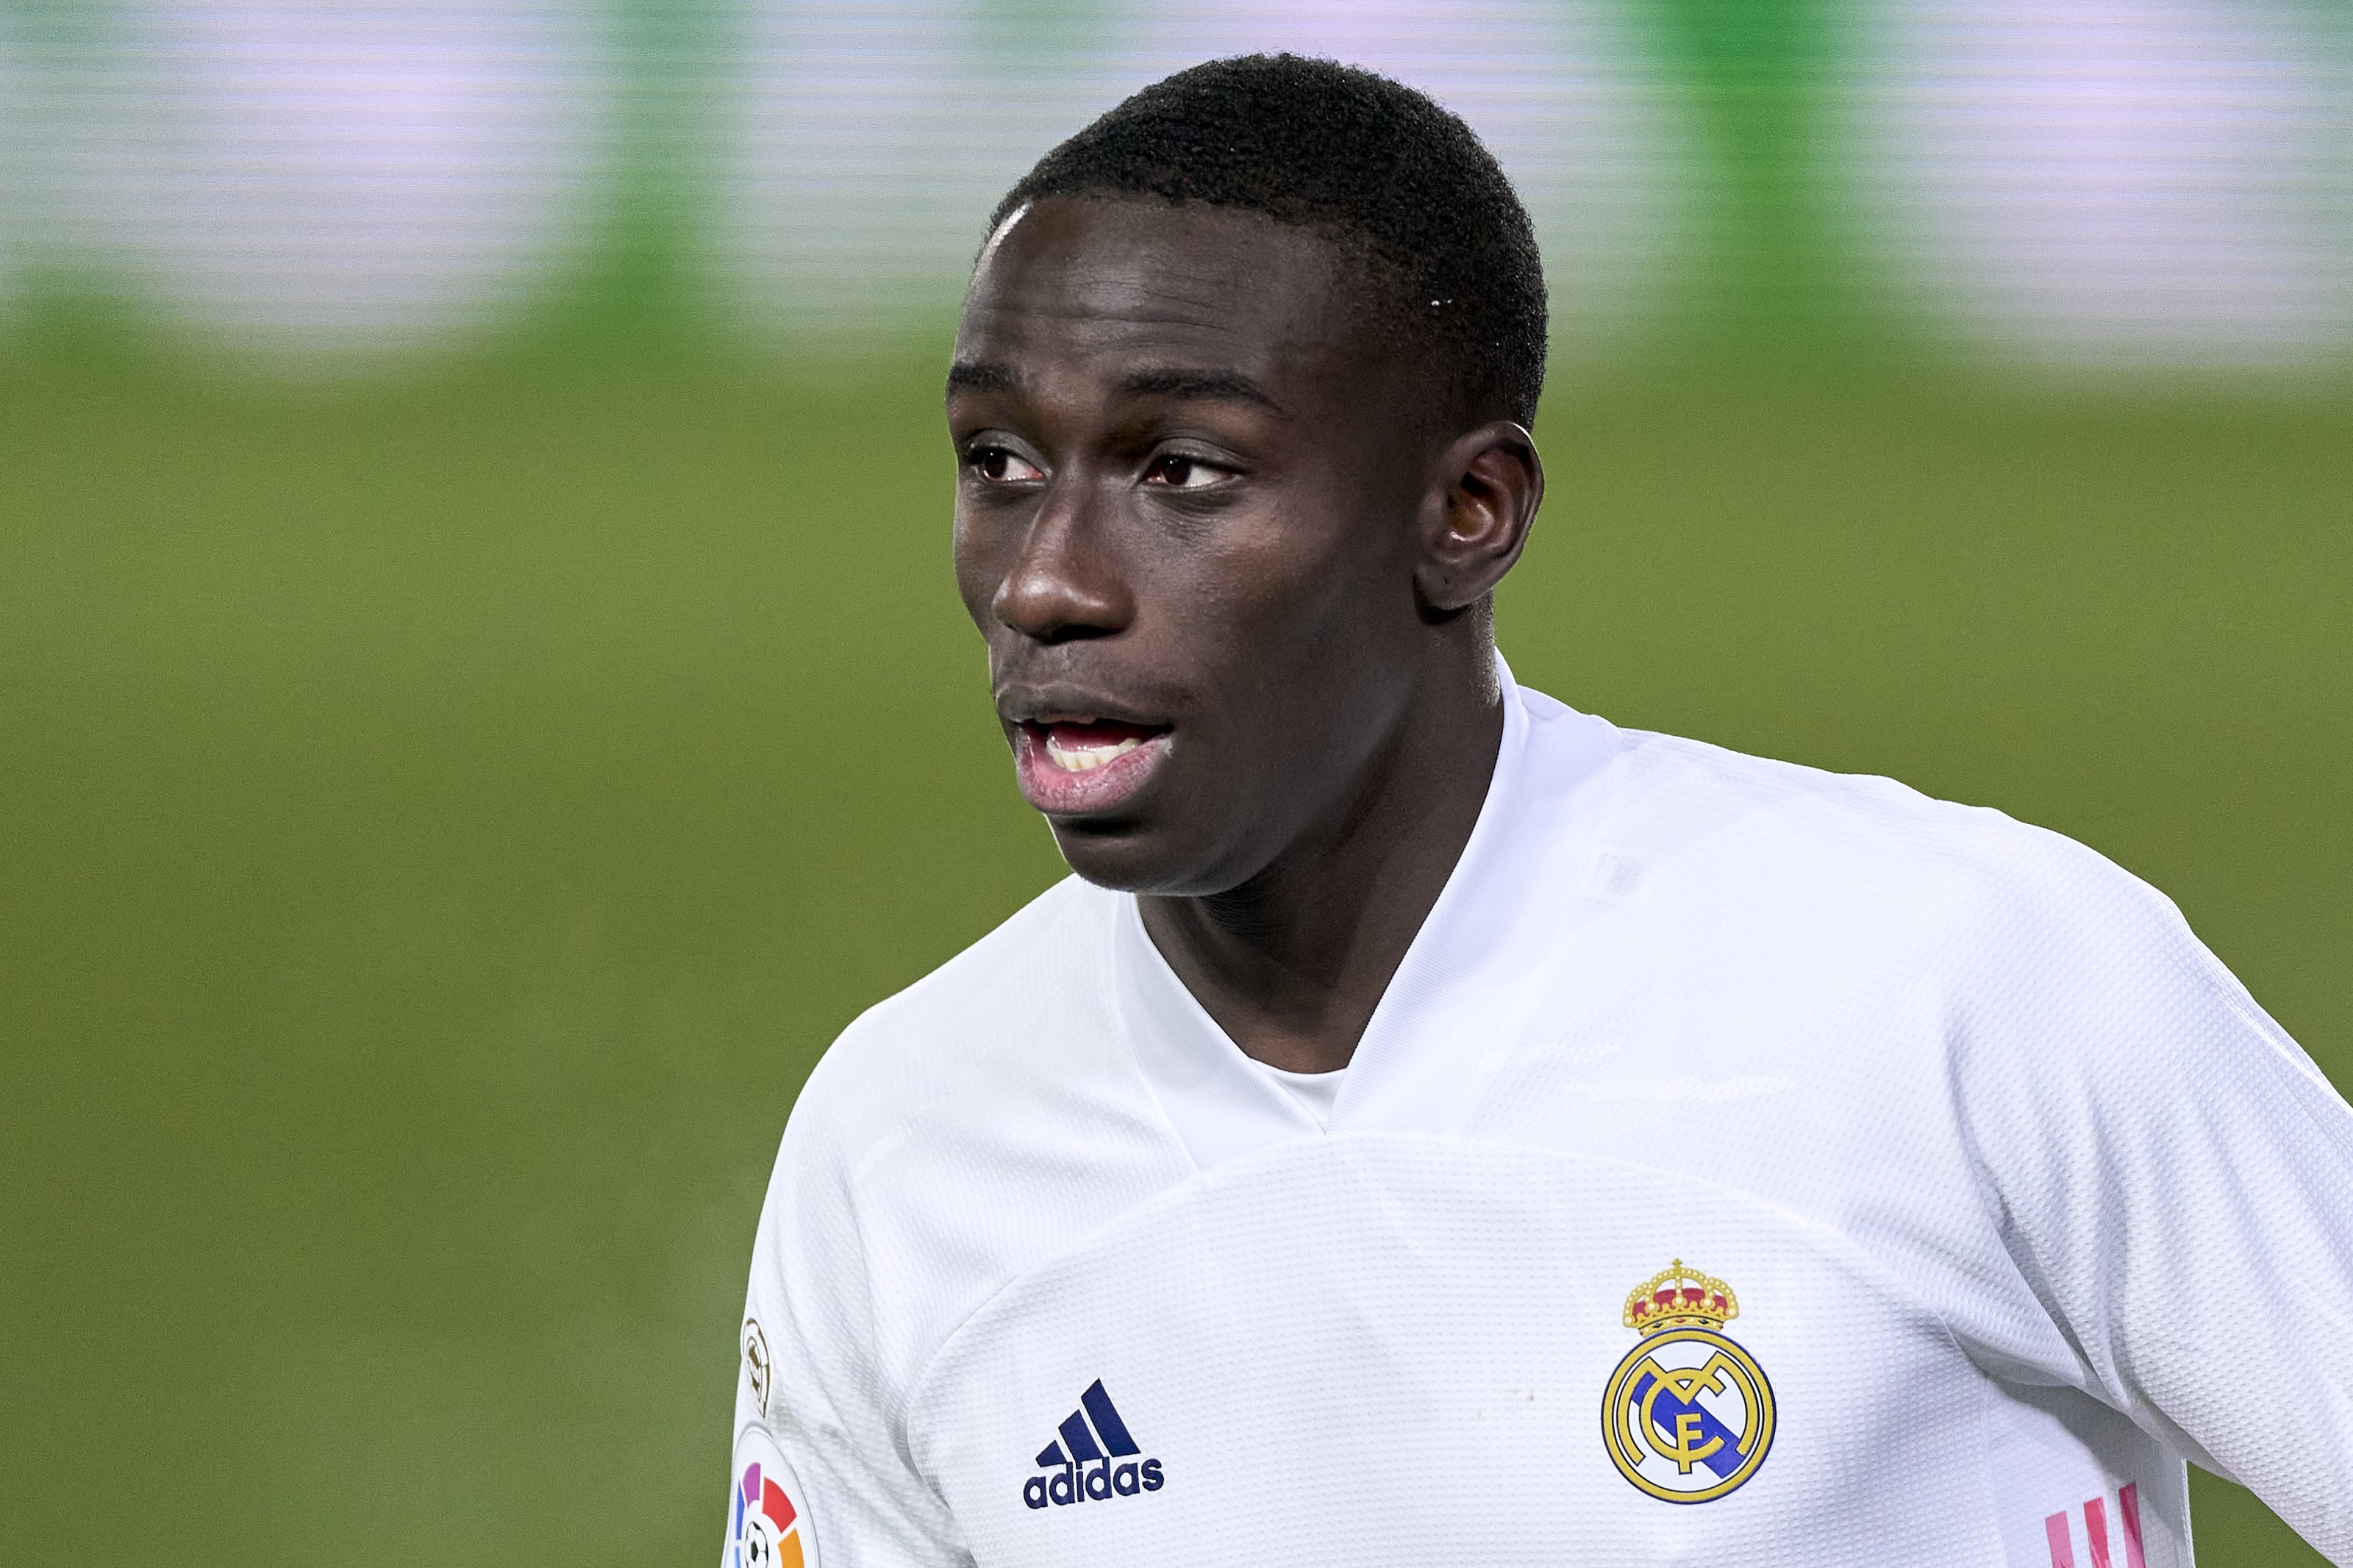 Real Madrid: Ferland Mendy continues to grow for Los Blancos